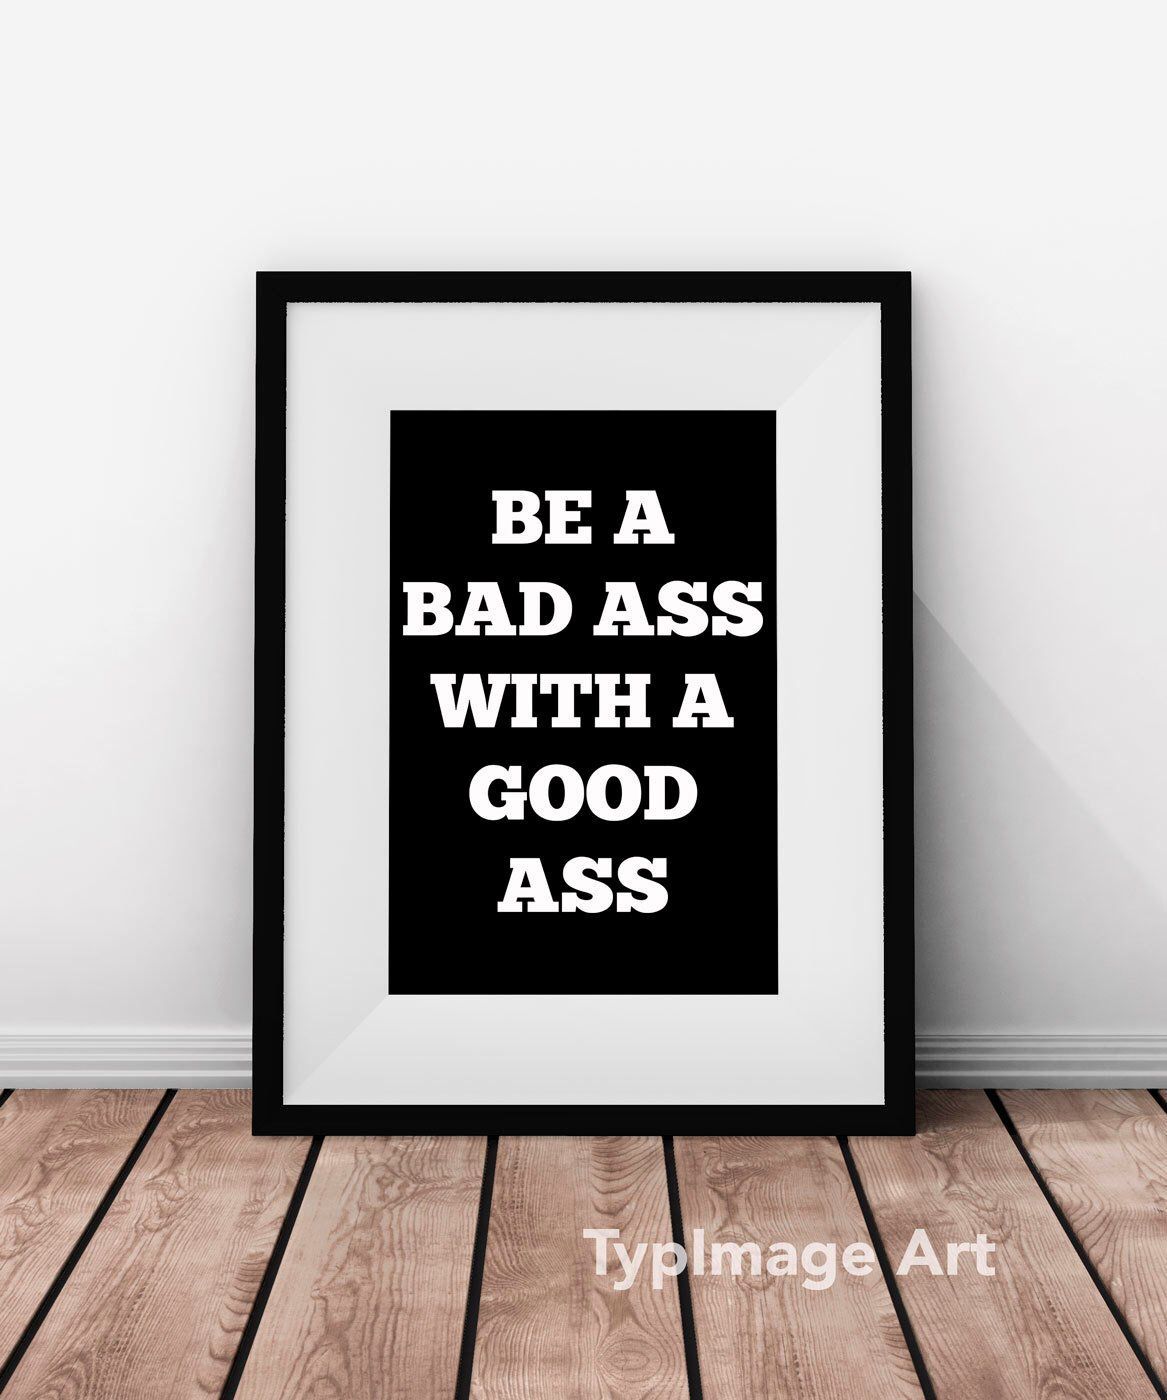 Bad Ass, Fitness Poster, Gym Poster, Workout Motivation, Motivational Quote, Fitness Gift, Workout Printable Poster, Gift for Women - Bad Ass, Fitness Poster, Gym Poster, Workout Motivation, Motivational Quote, Fitness Gift, Workout Printable Poster, Gift for Women -   17 summer fitness Poster ideas